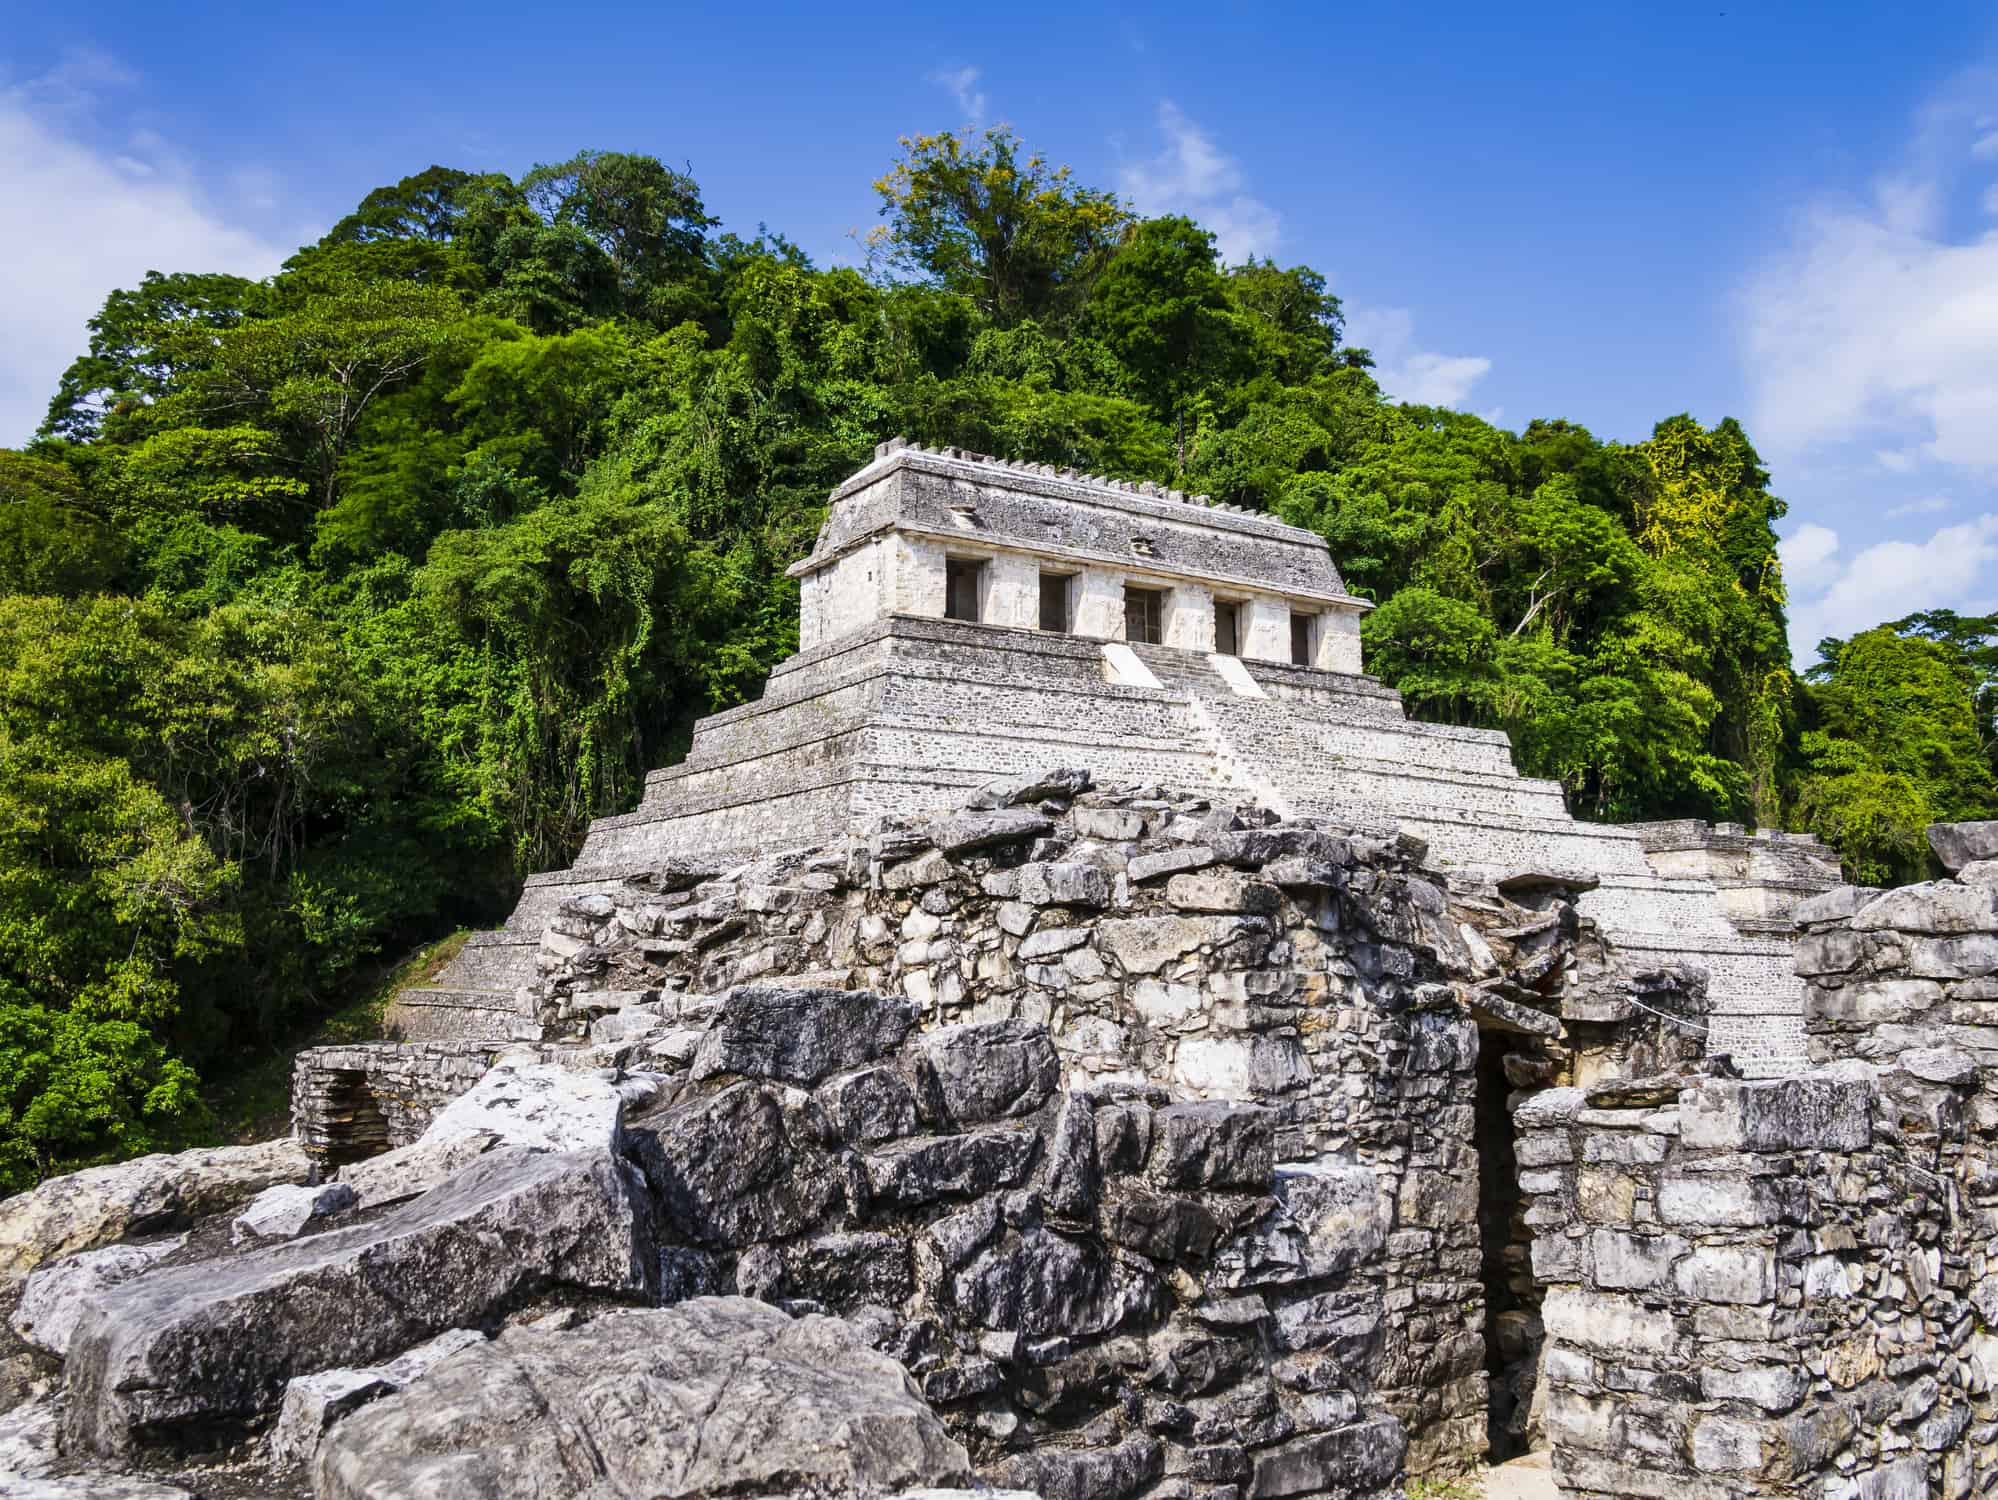 Stunning ruins of Palenque archaeological site and its well-preserved Temple of Inscriptions, Chiapas, Mexico